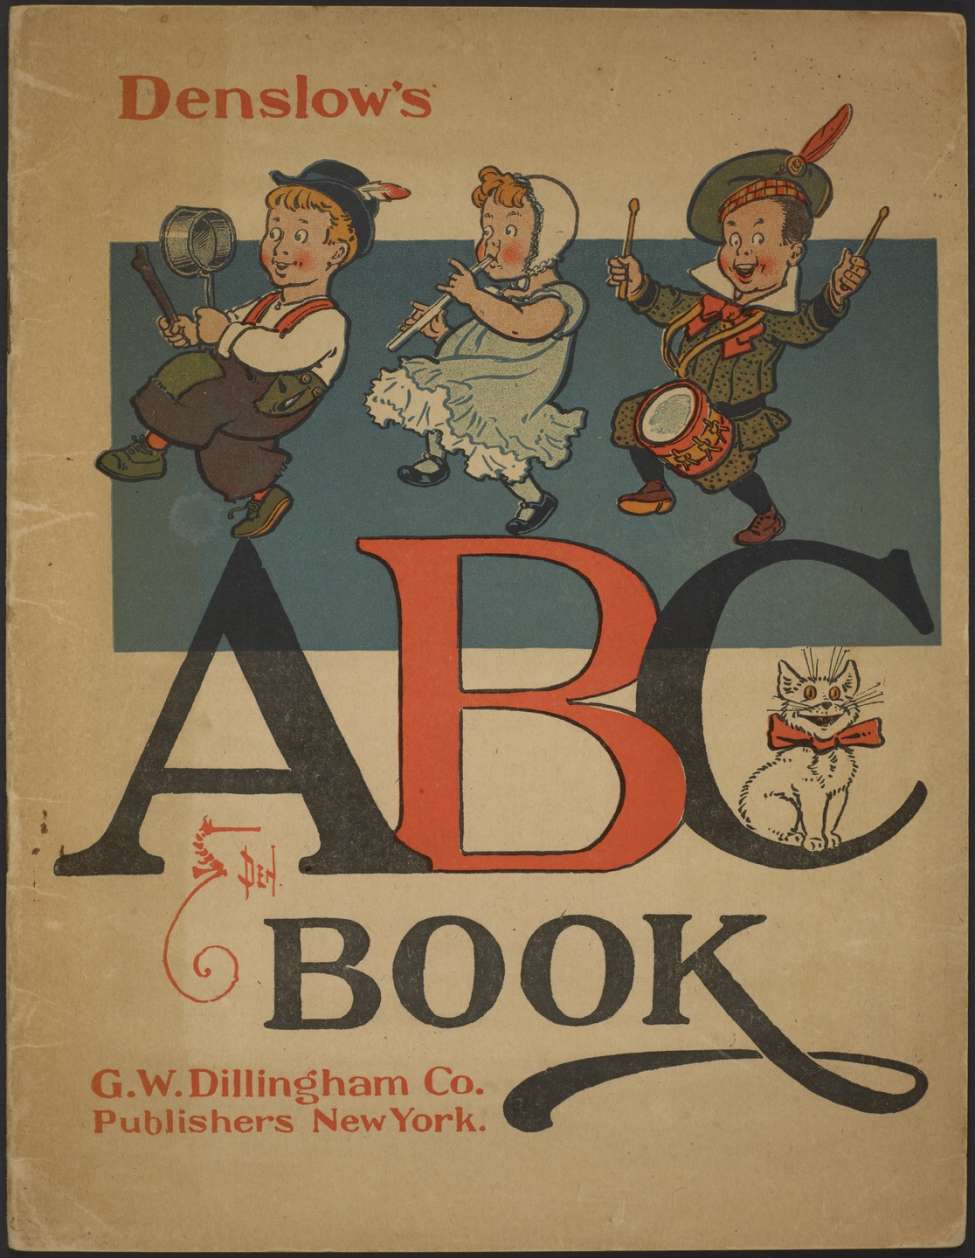 Comic Book Cover For Denslow's ABC Book